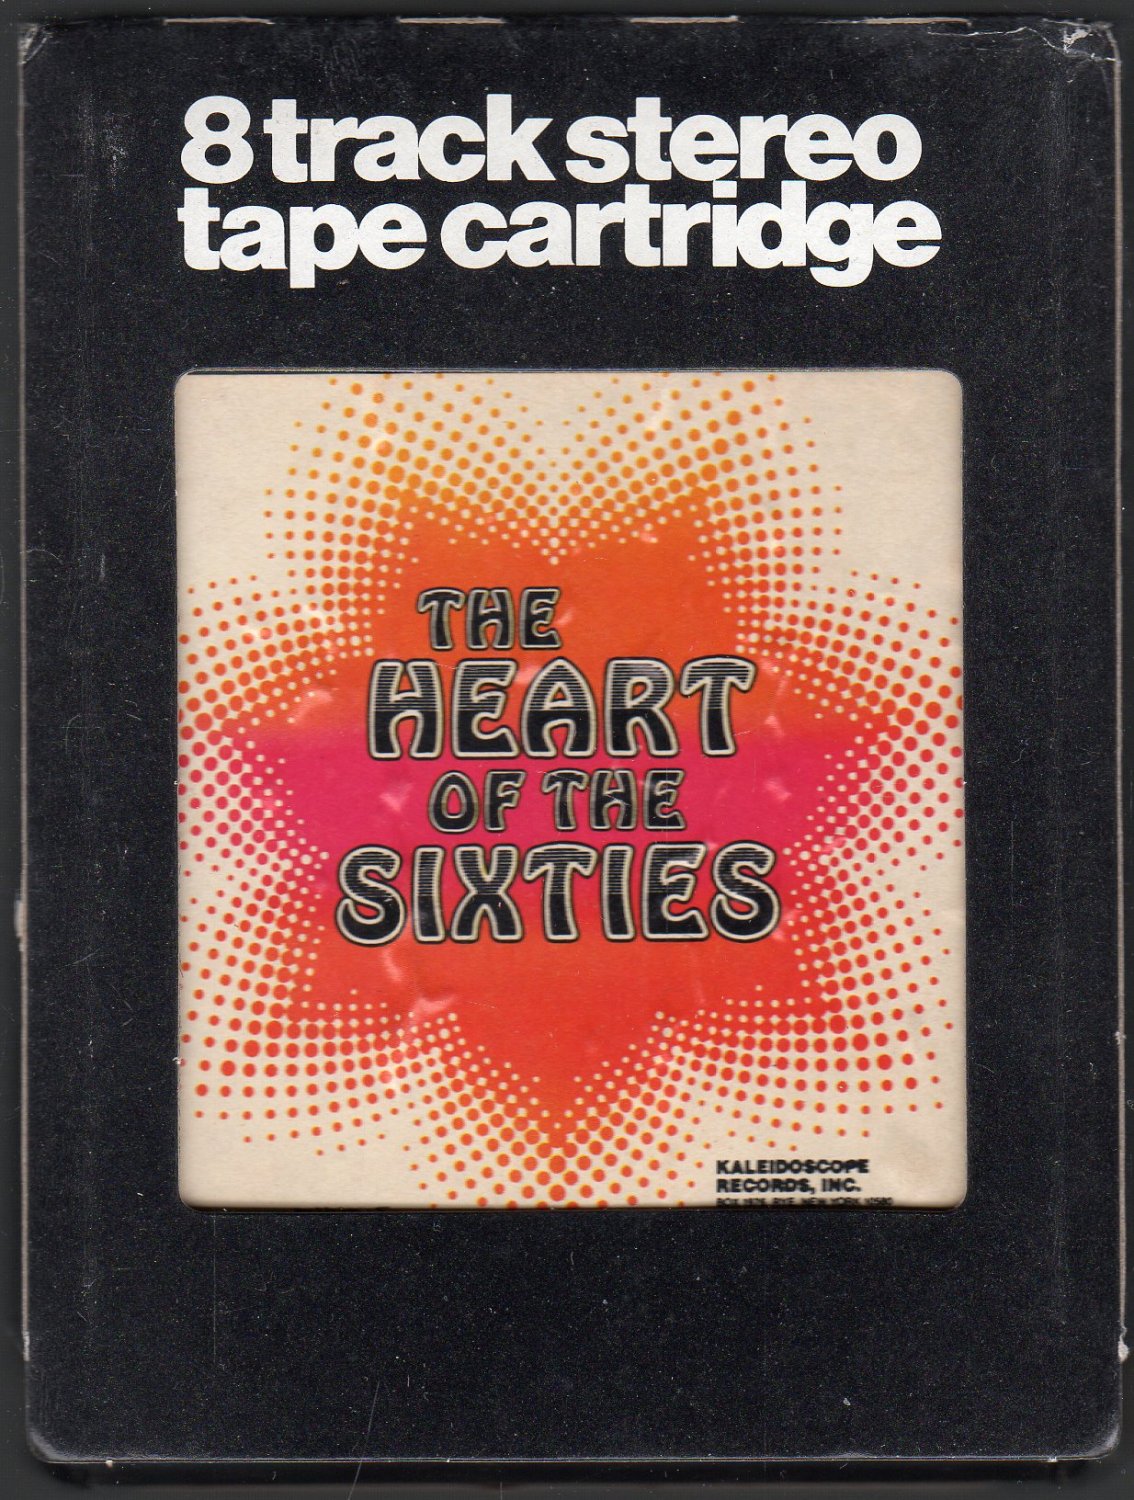 The Heart Of The Sixties - Various Rock 1977 KALEIDESCOPE A11 8-track tape